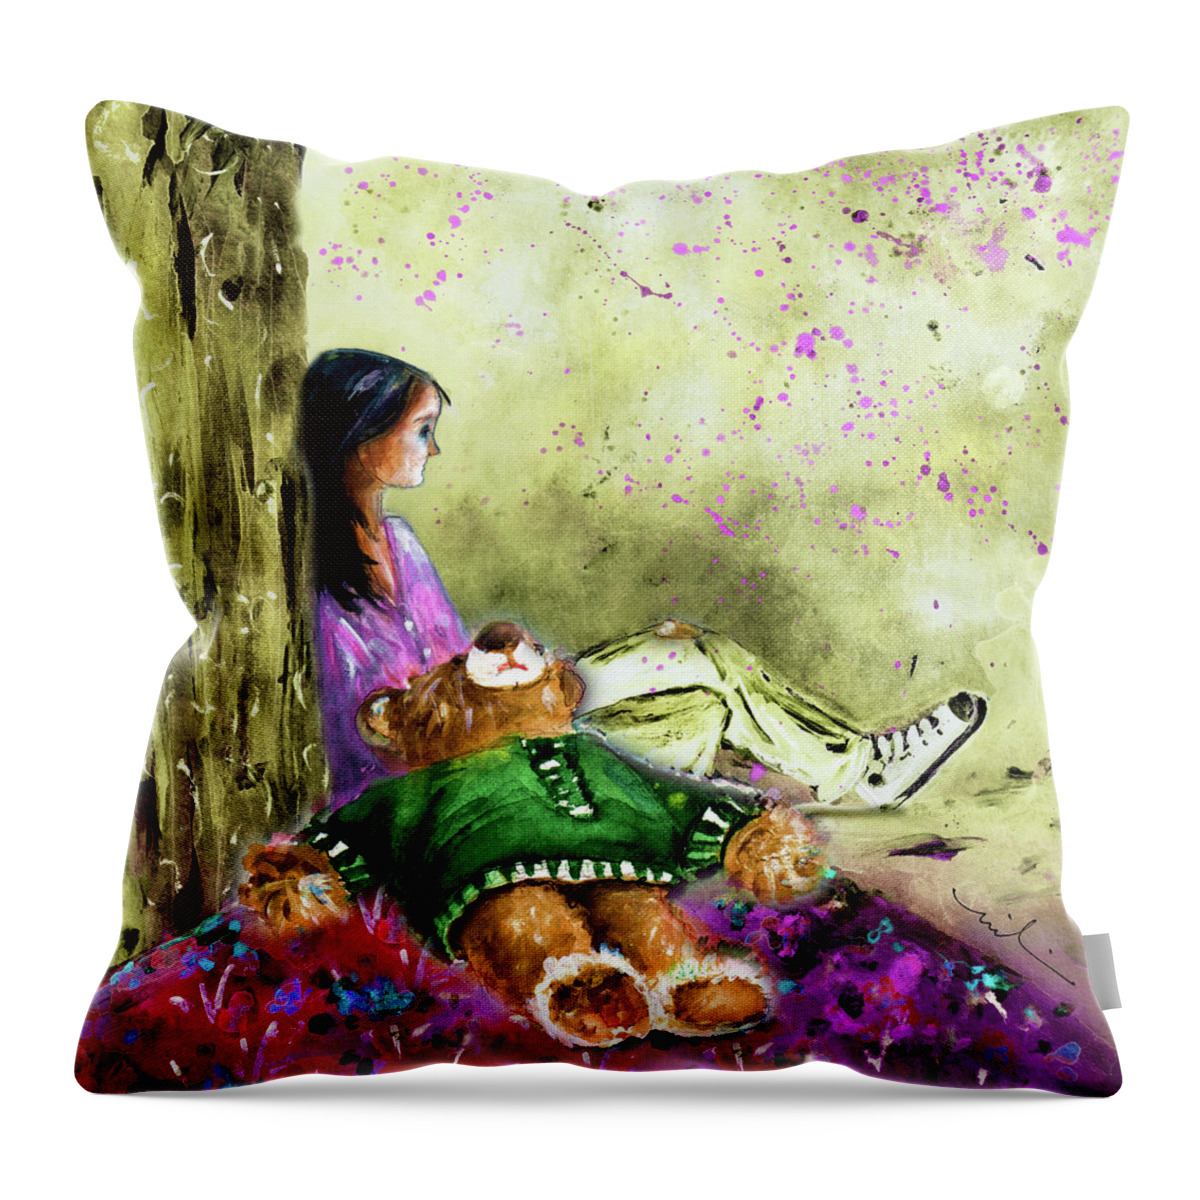 Truffle Mcfurry Throw Pillow featuring the painting I Want To Lay You Down In A Bed Of Roses by Miki De Goodaboom